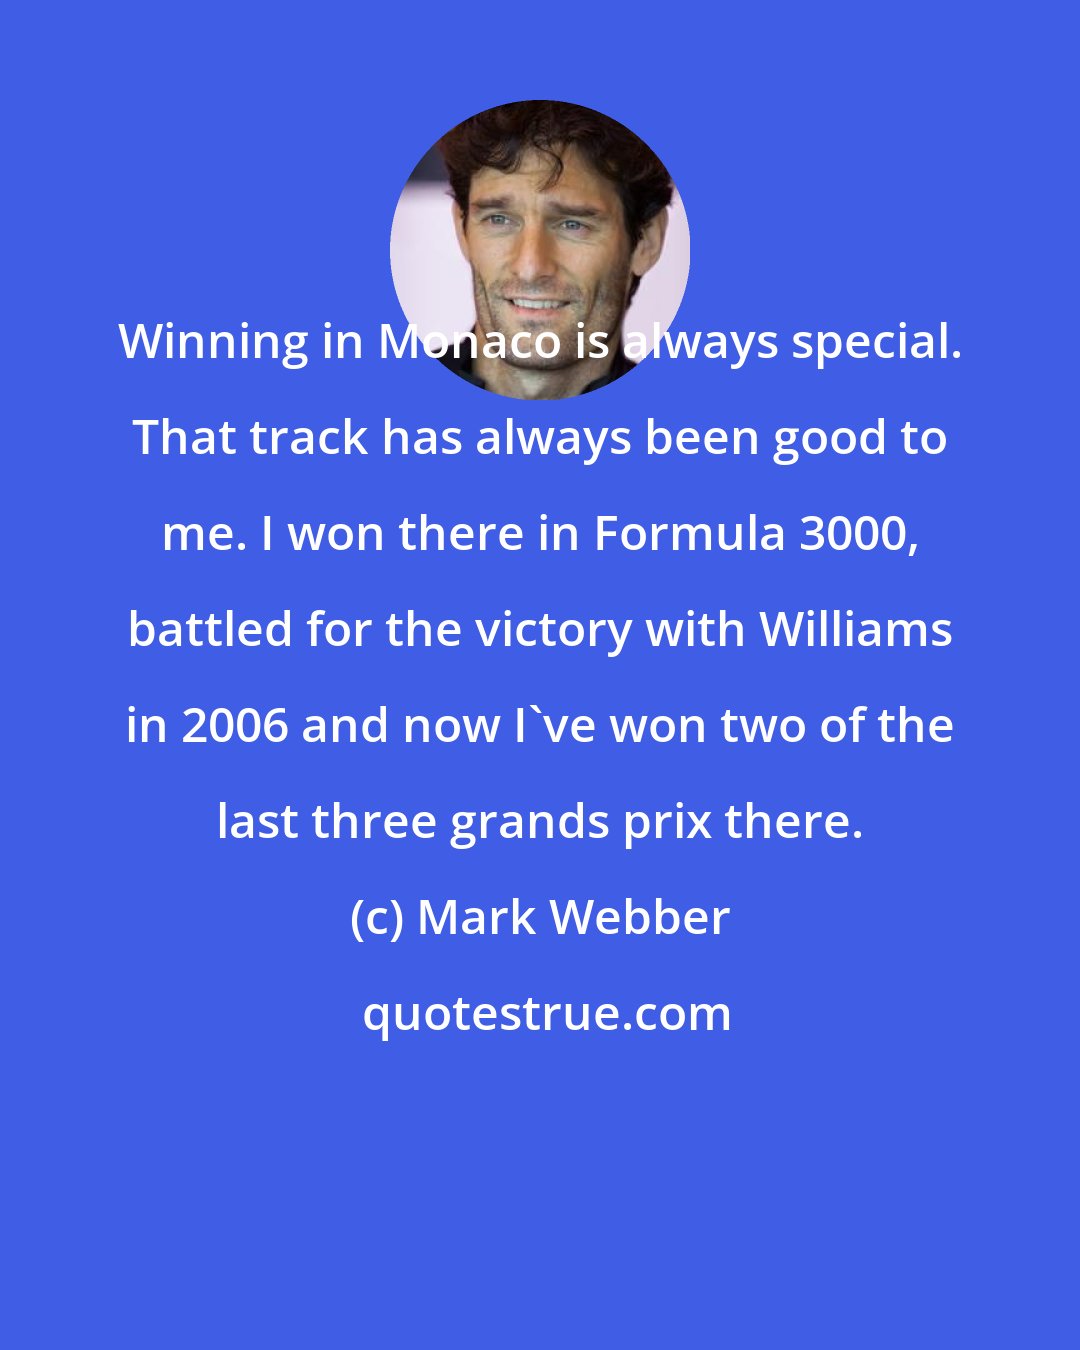 Mark Webber: Winning in Monaco is always special. That track has always been good to me. I won there in Formula 3000, battled for the victory with Williams in 2006 and now I've won two of the last three grands prix there.